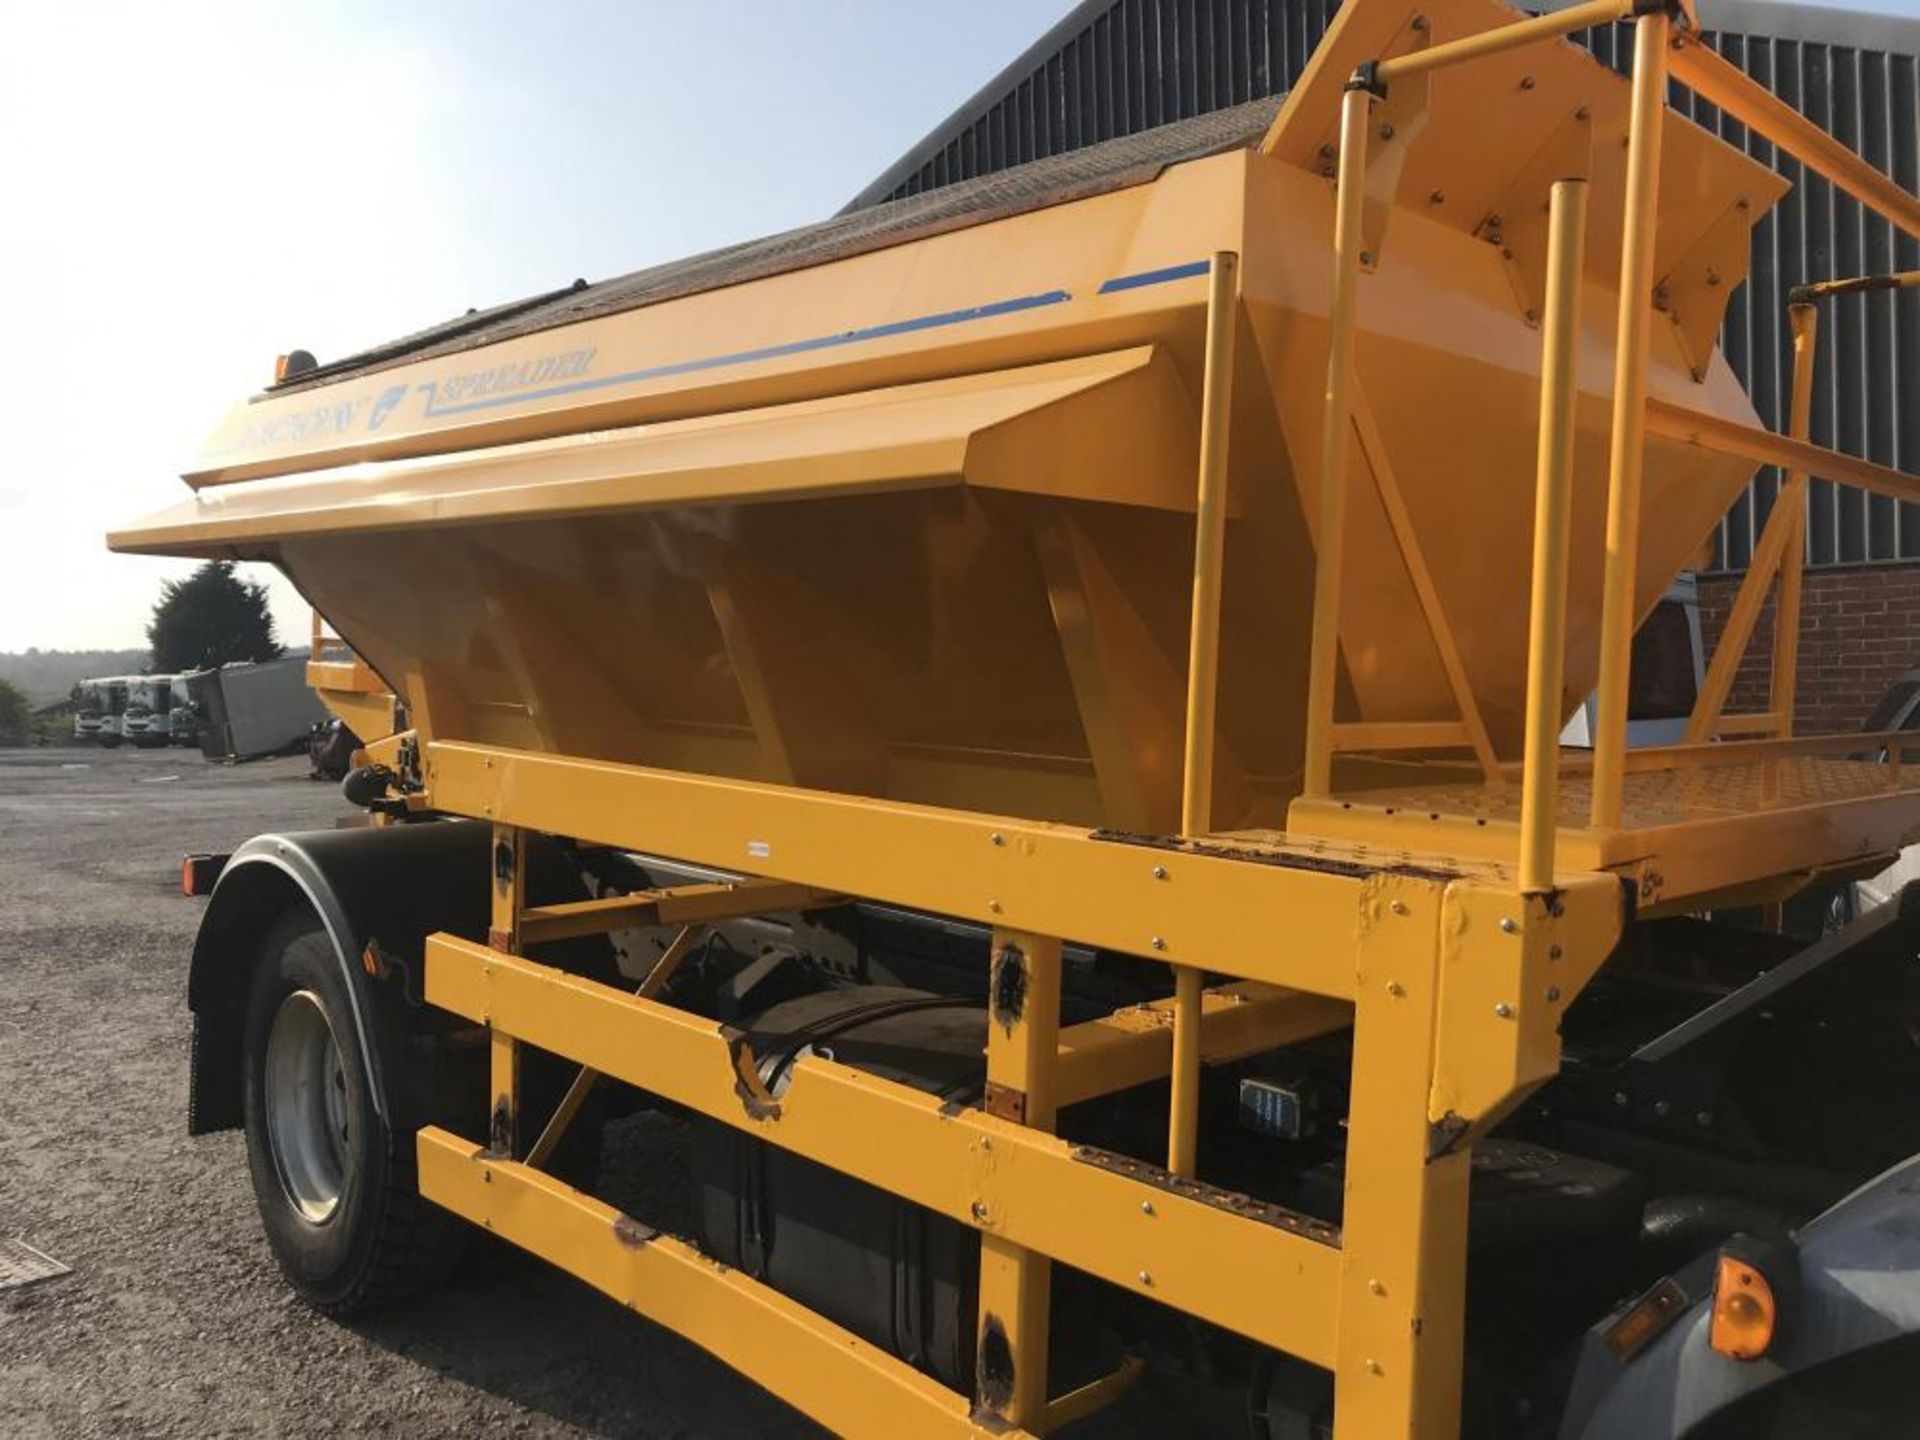 2005/05 REG DAF TRUCKS FA LF55.220 18 TON ECON BODY GRITTER WITH SNOW PLOUGH, EX COUNCIL *PLUS VAT* - Image 8 of 17